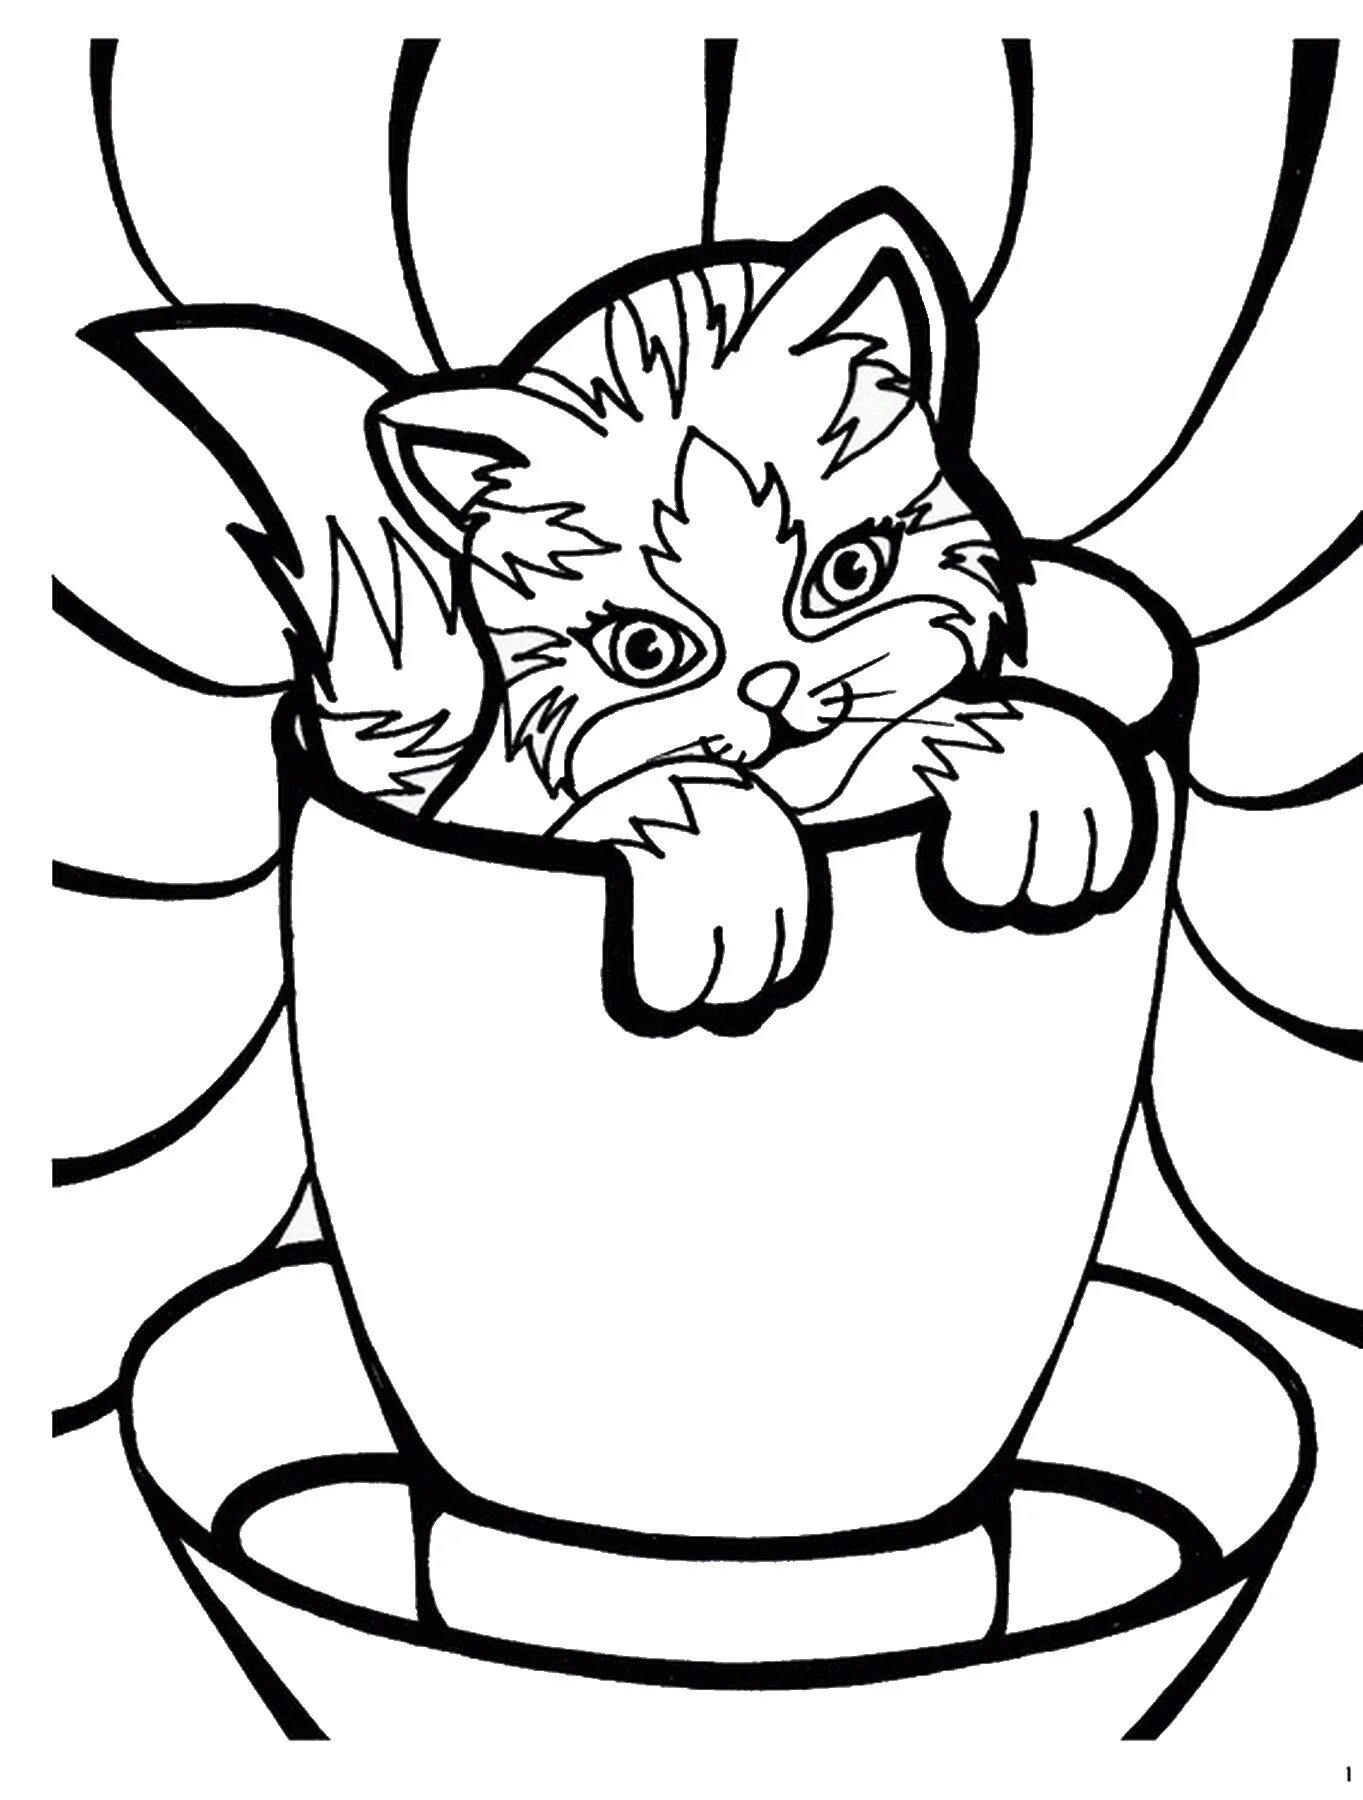 Coloring lazy cat in a mug